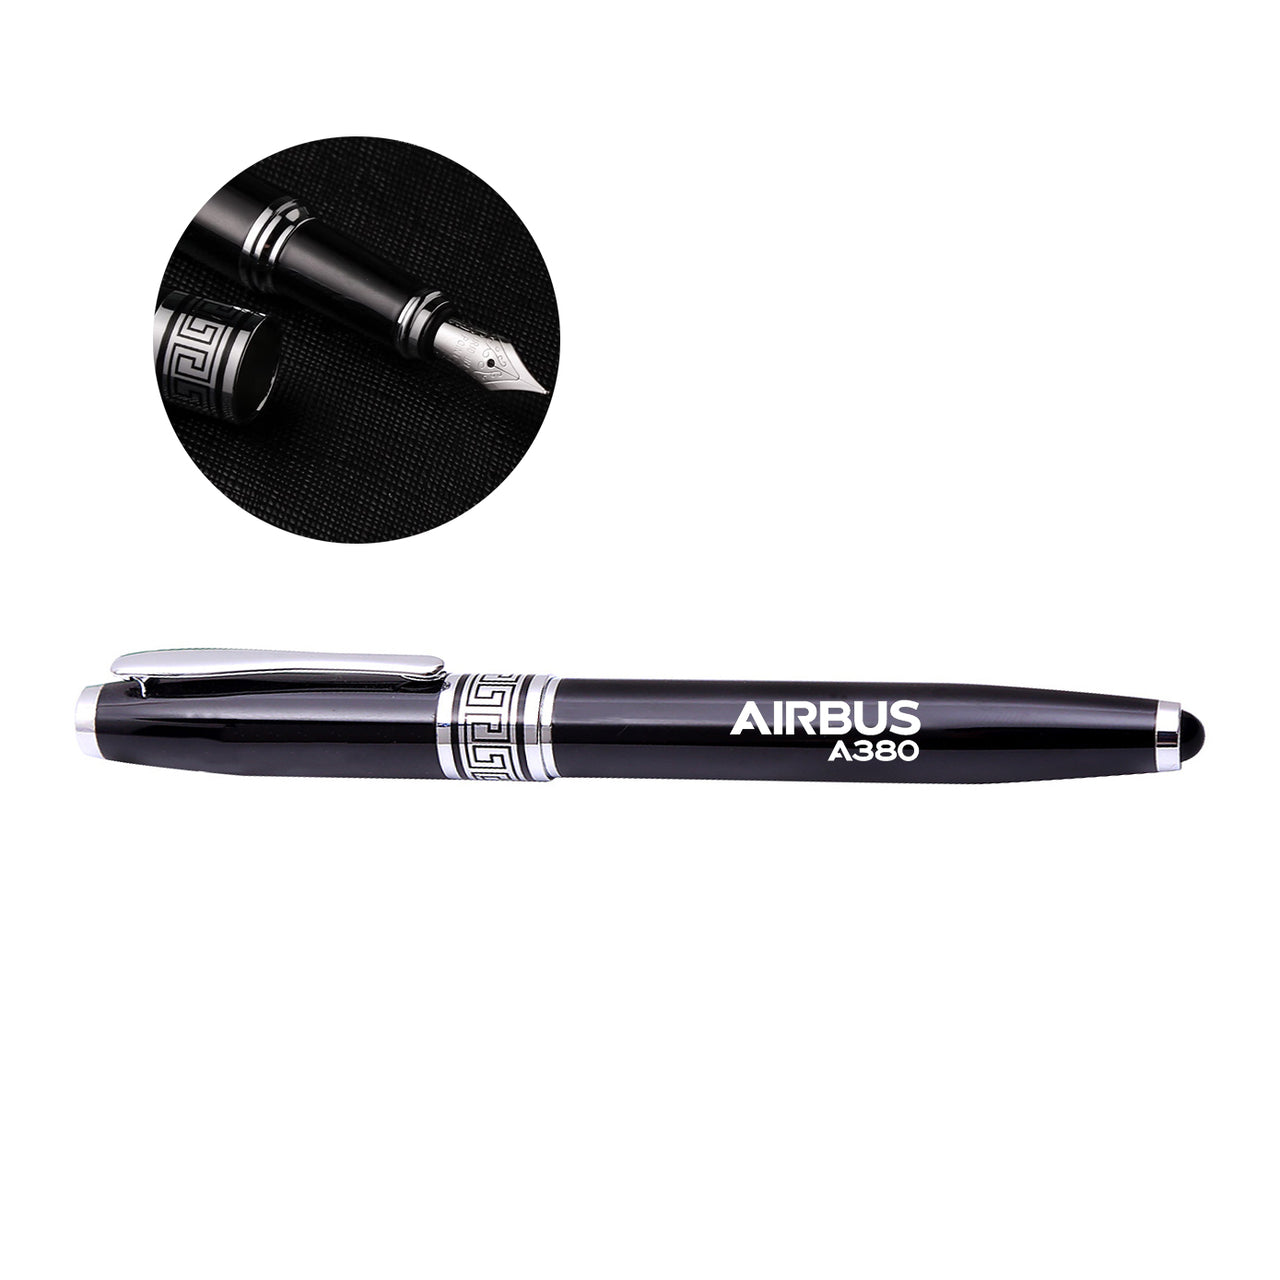 Airbus A380 & Text Designed Pens